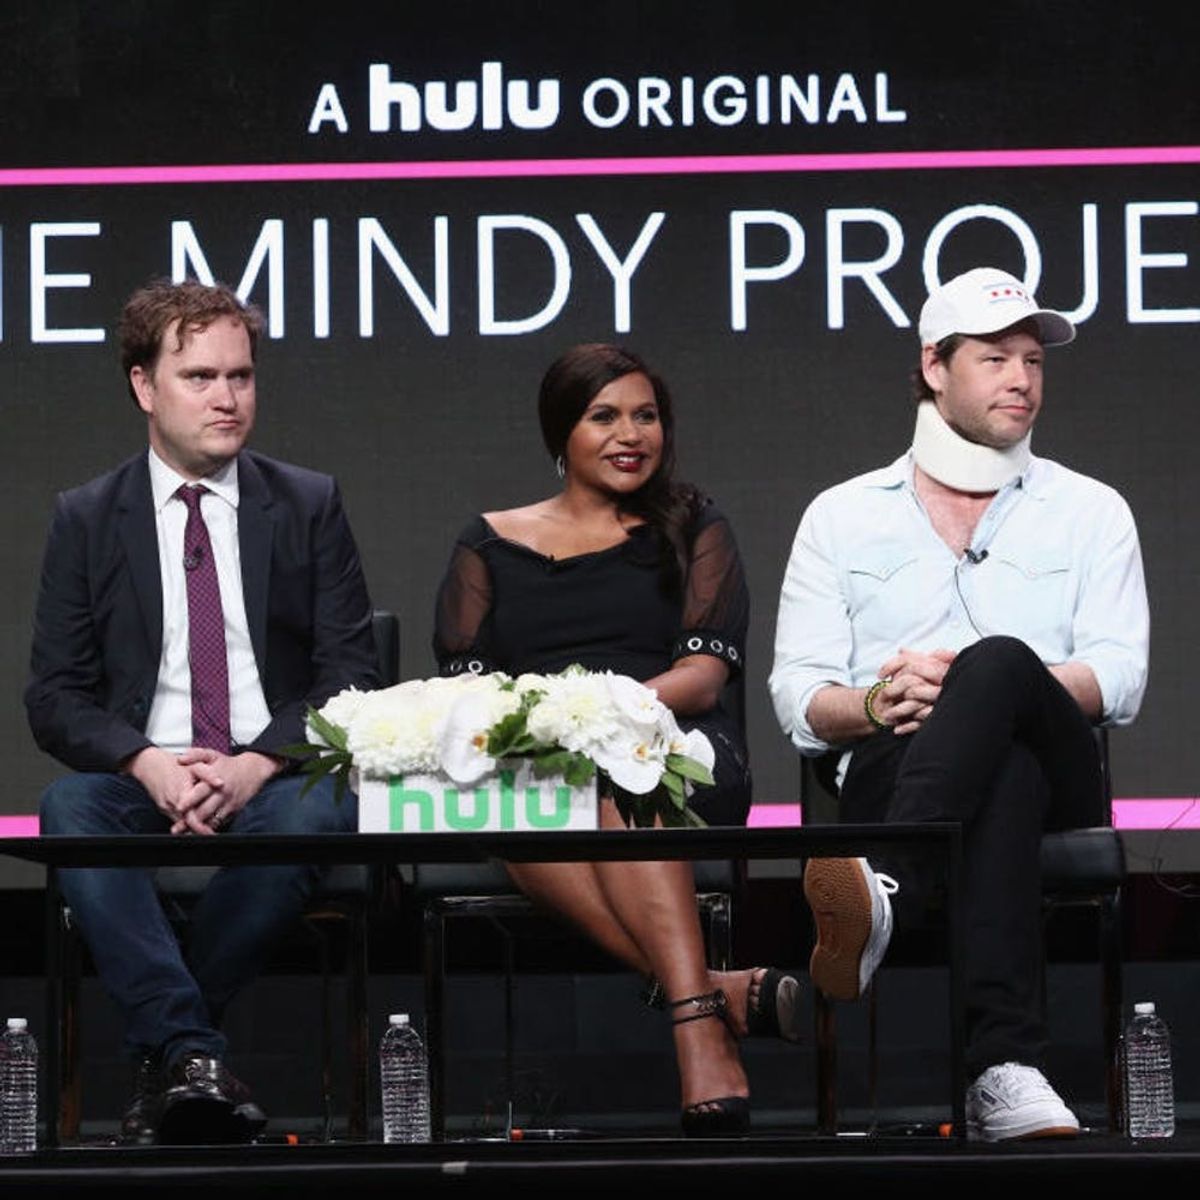 4 Things to Know About The Mindy Project’s Final Season (Including Details on Chris Messina’s Return!)